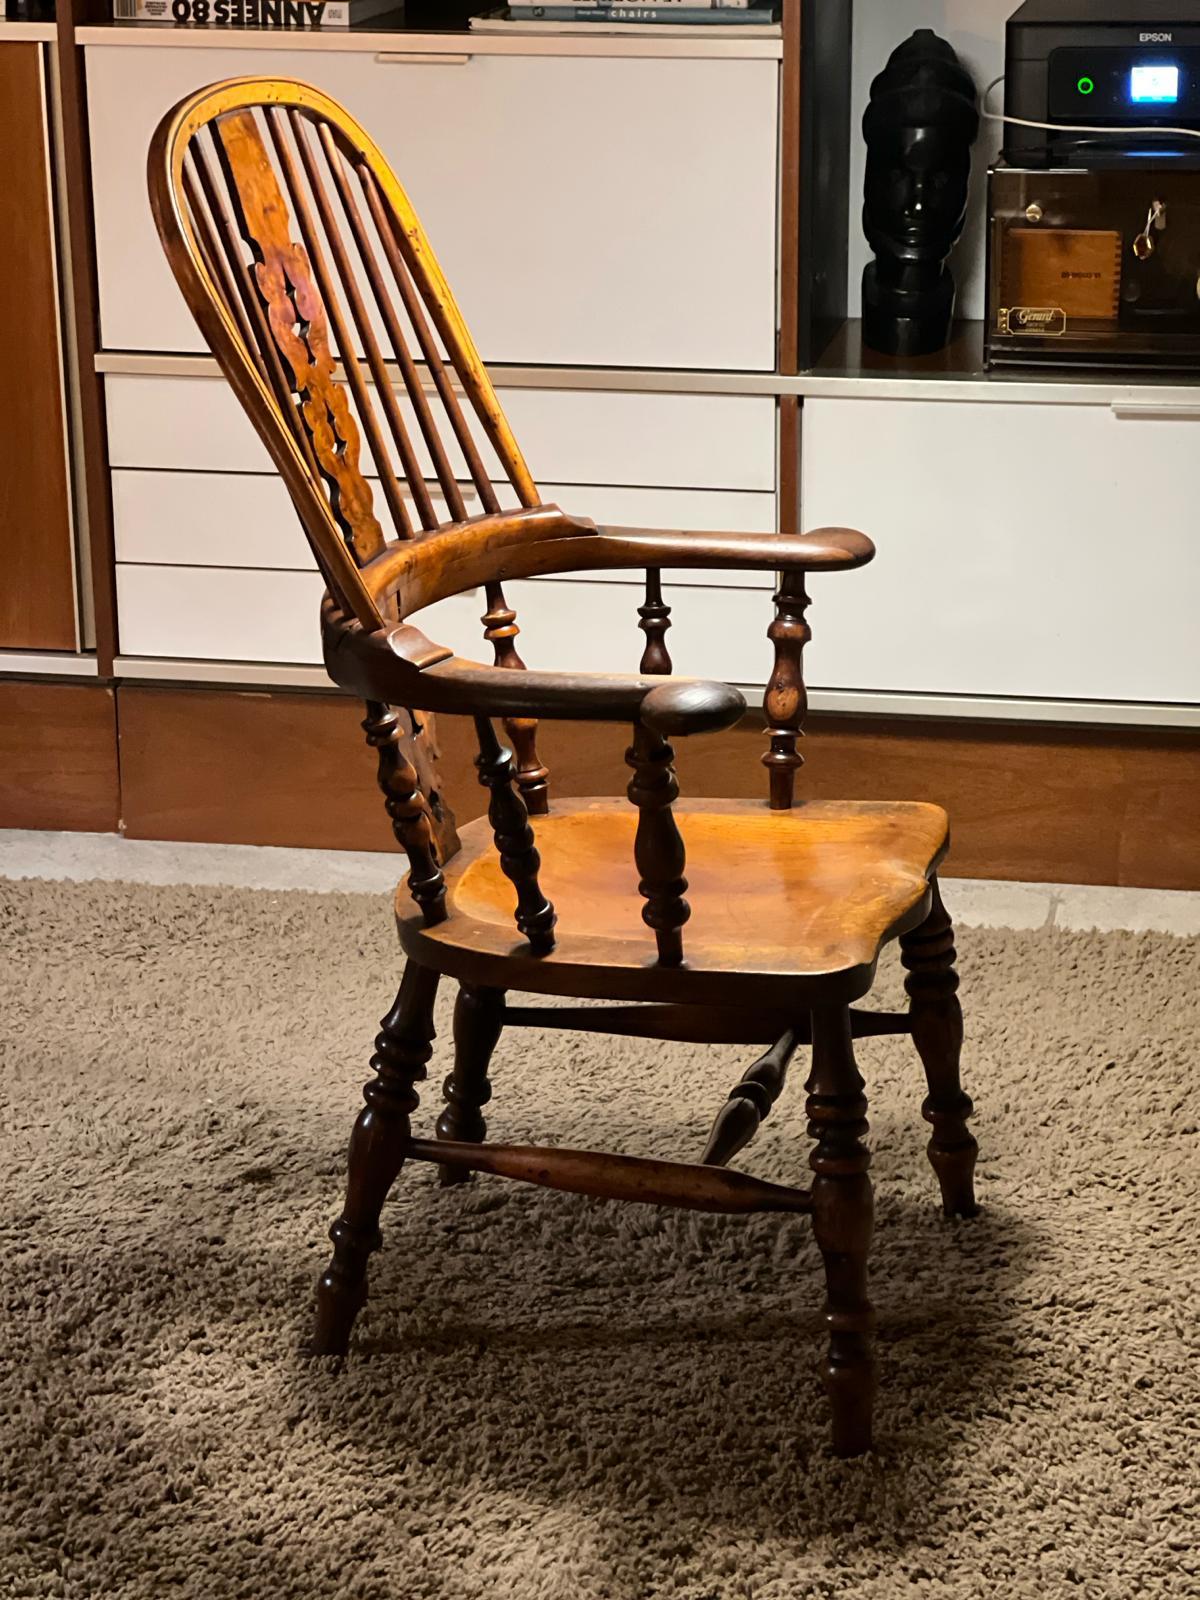 Large Victorian Windsor armchair in solid elm with high comb-shaped back. Wide turned wooden base. Wide hoop-shaped arms. Perfect for an office or bedroom.